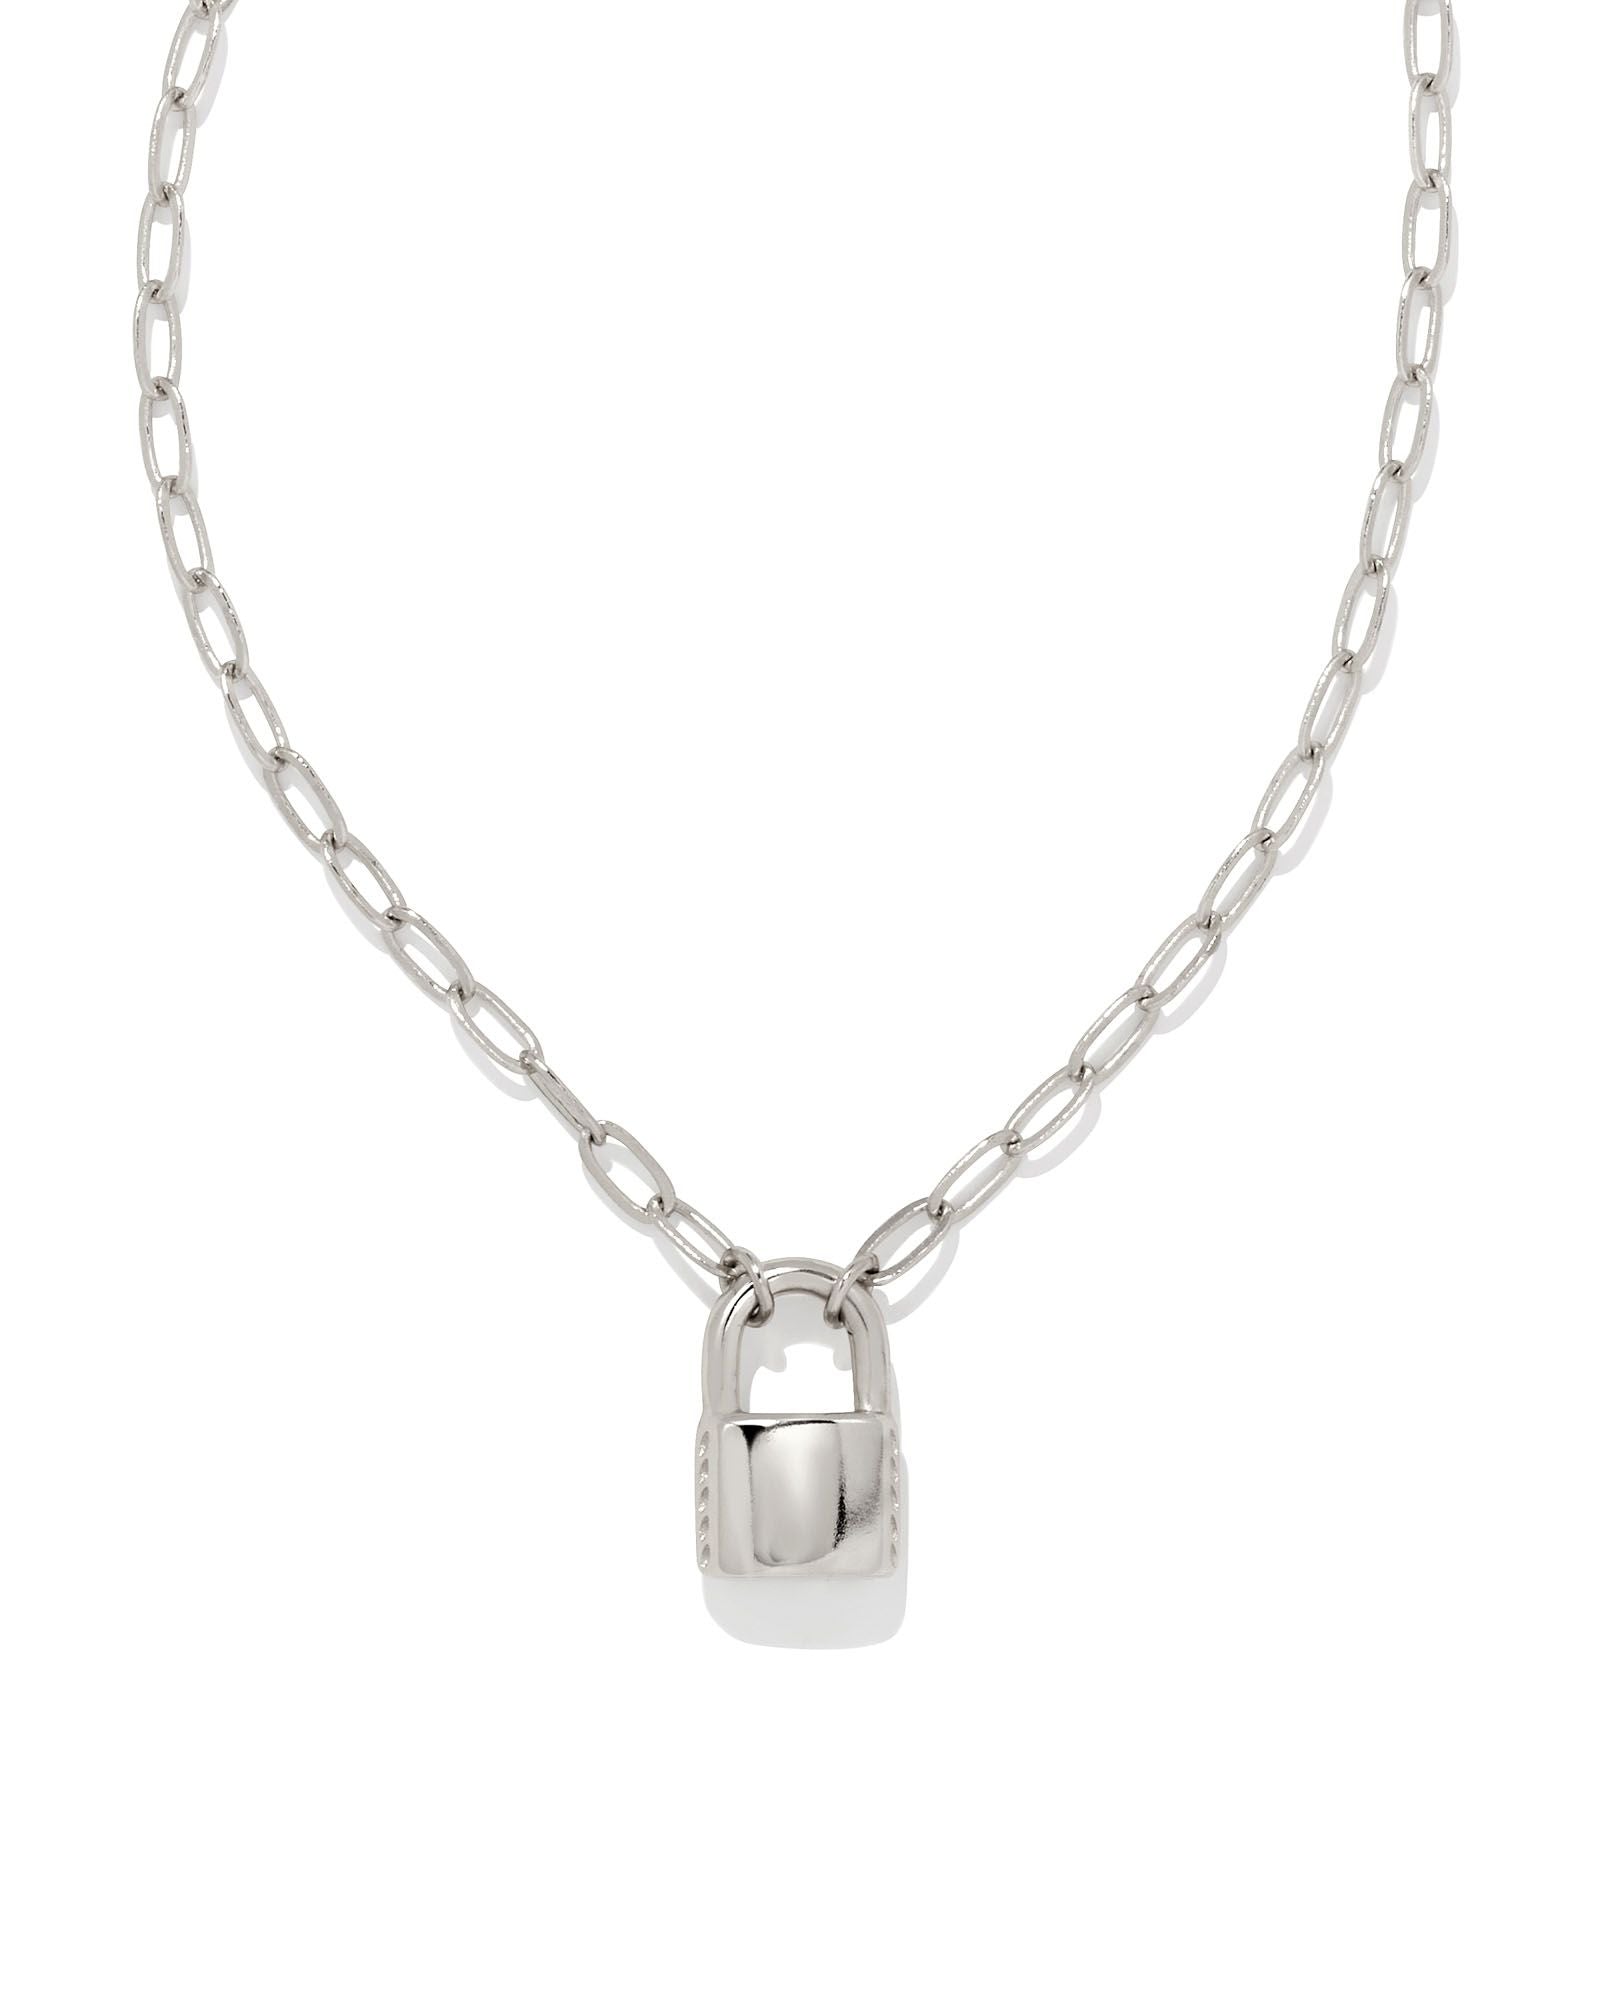 Kendra Scott Jess Small Lock and Chain Necklace Rhodium Metal-Necklaces-Kendra Scott-N1901RHD-The Twisted Chandelier